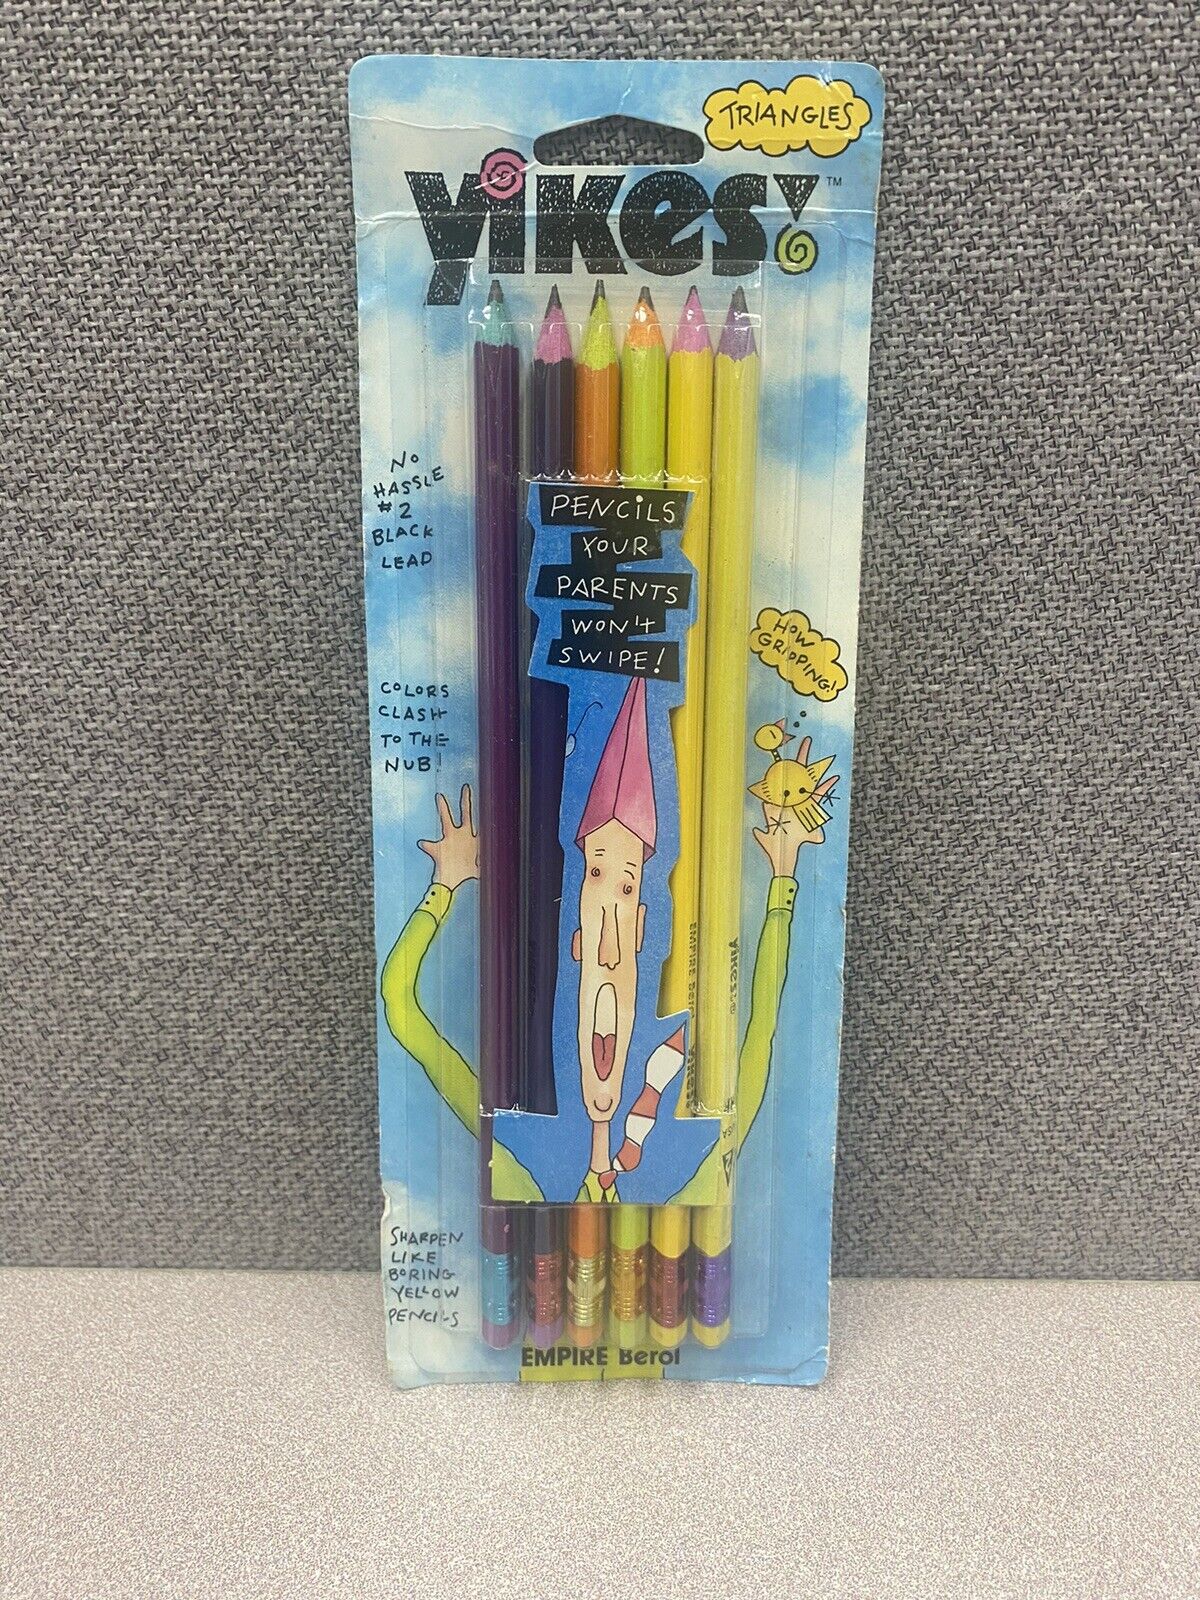 Vtg YIKES TRIANGLES Black Lead PENCILS 5 Pack 90’s NOS Sealed Made in USA 91303